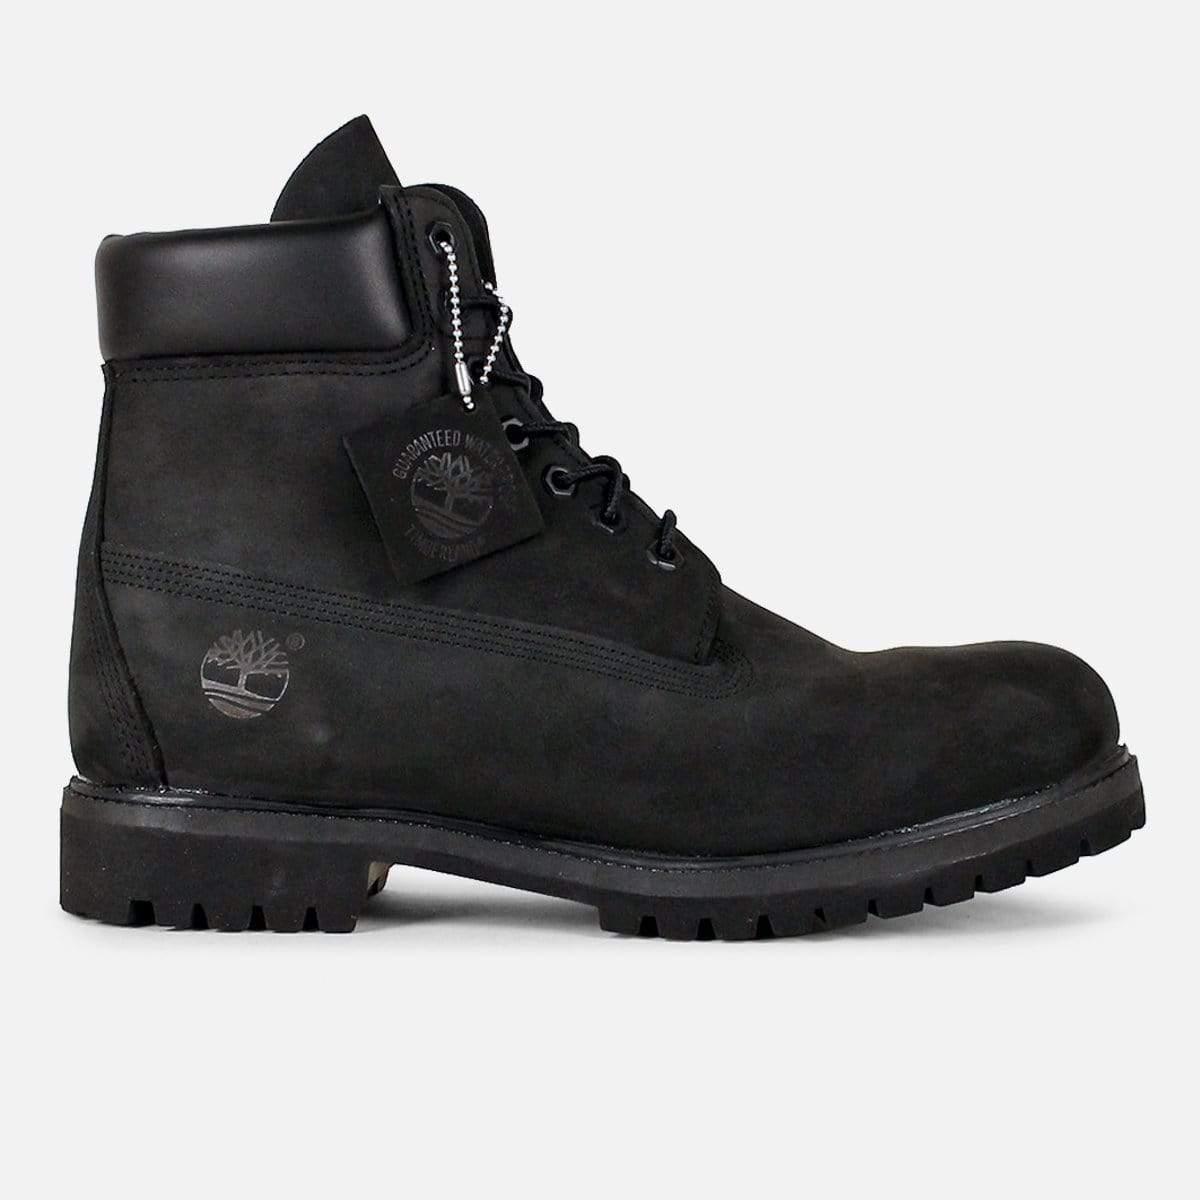 Timberland Classic 6" Suede Boot in Black for Men - Save 25% - Lyst